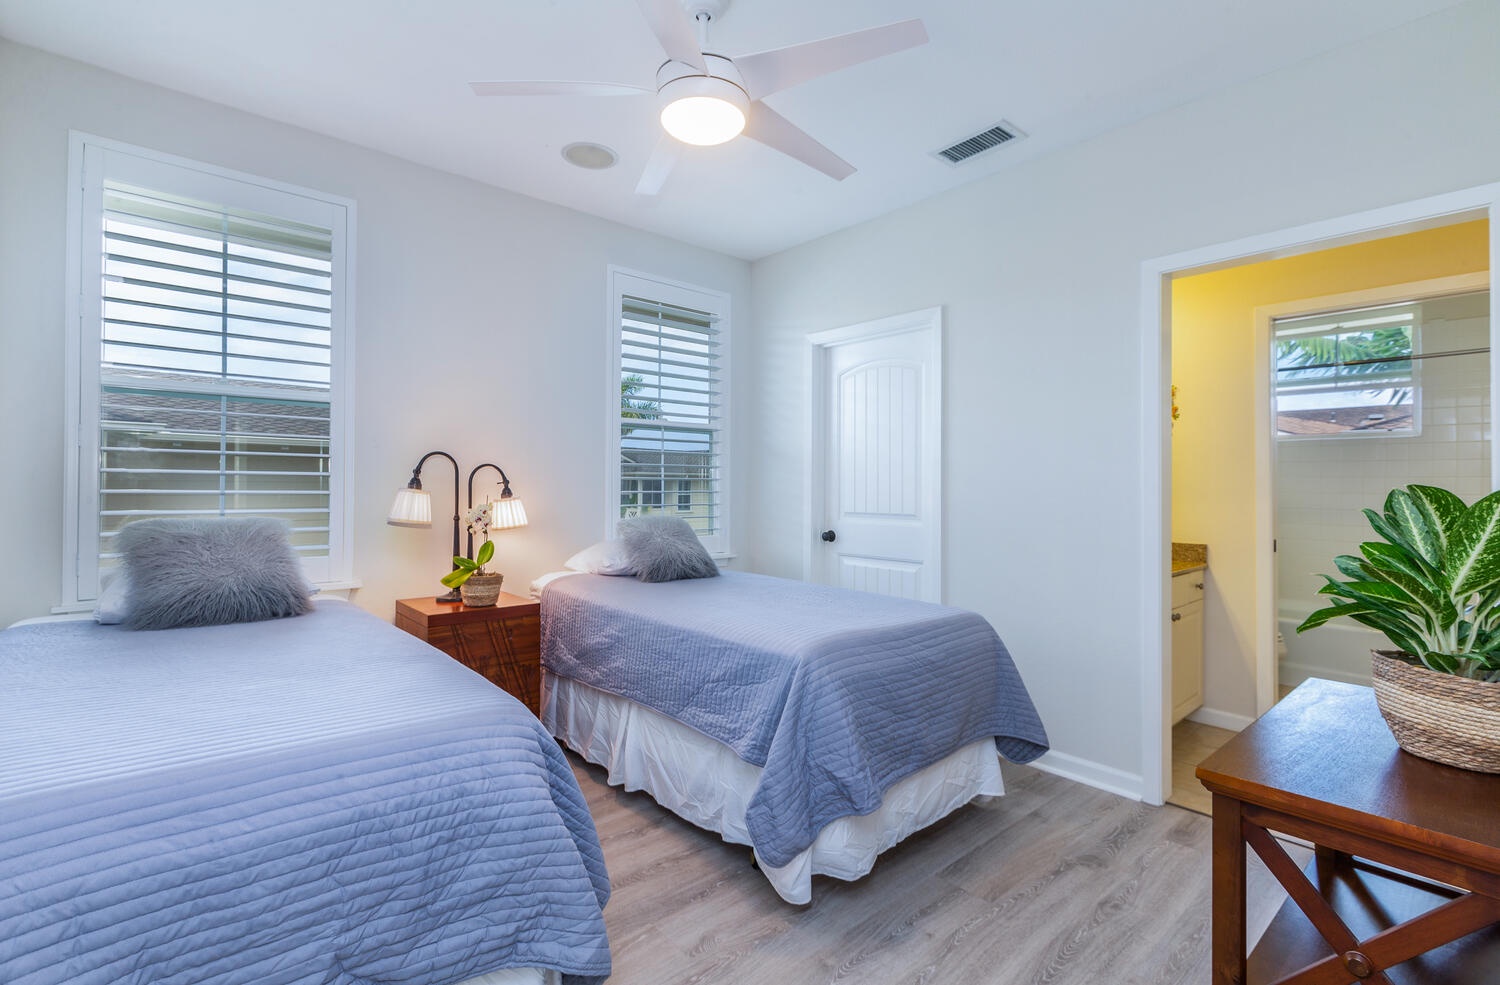 Princeville Vacation Rentals, Leilani Villa - Guest bedroom with two twin beds